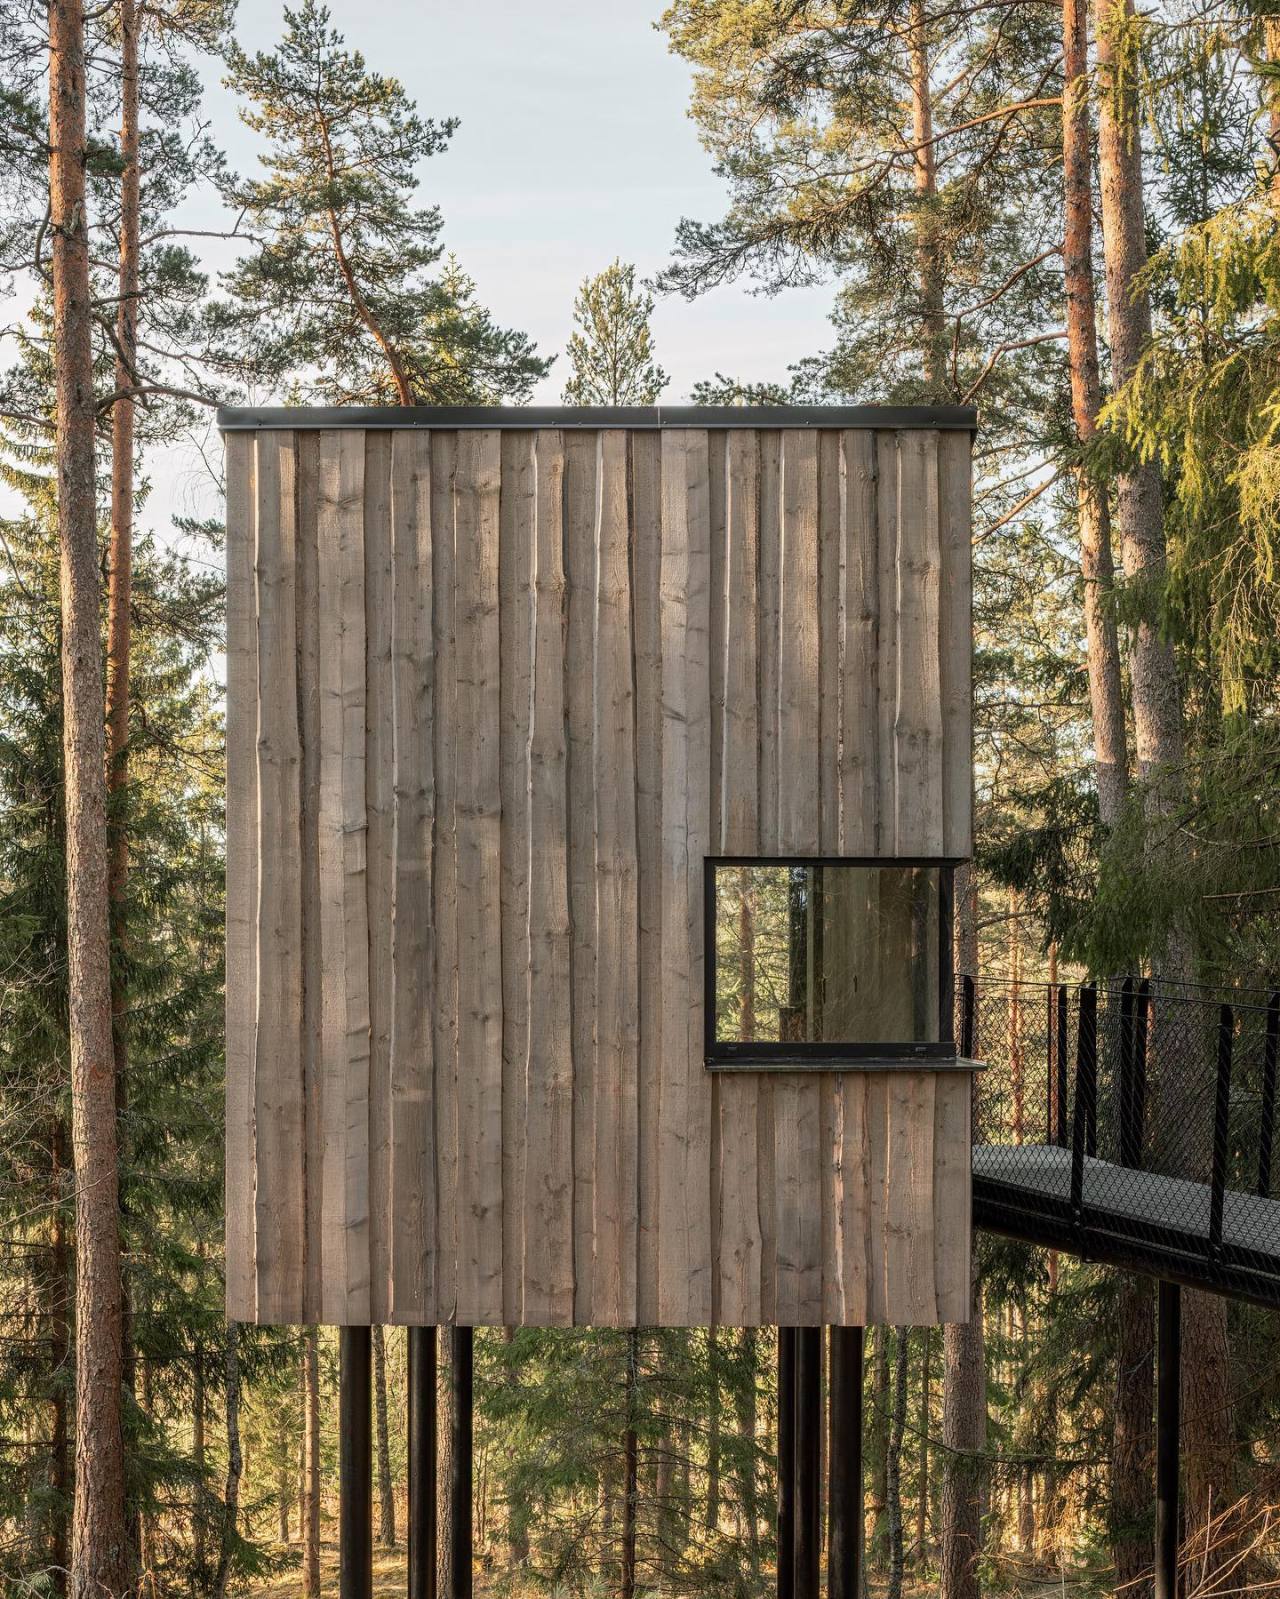 Photographer @jamessilvermanphoto just photographed the newly opened @traktforest.hotel designed by @wingardhs @gertwingardh in Småland, Sweden. Comprising of 5 wooden cabins all floating on thin steel beams. More photos on @cabinporn.